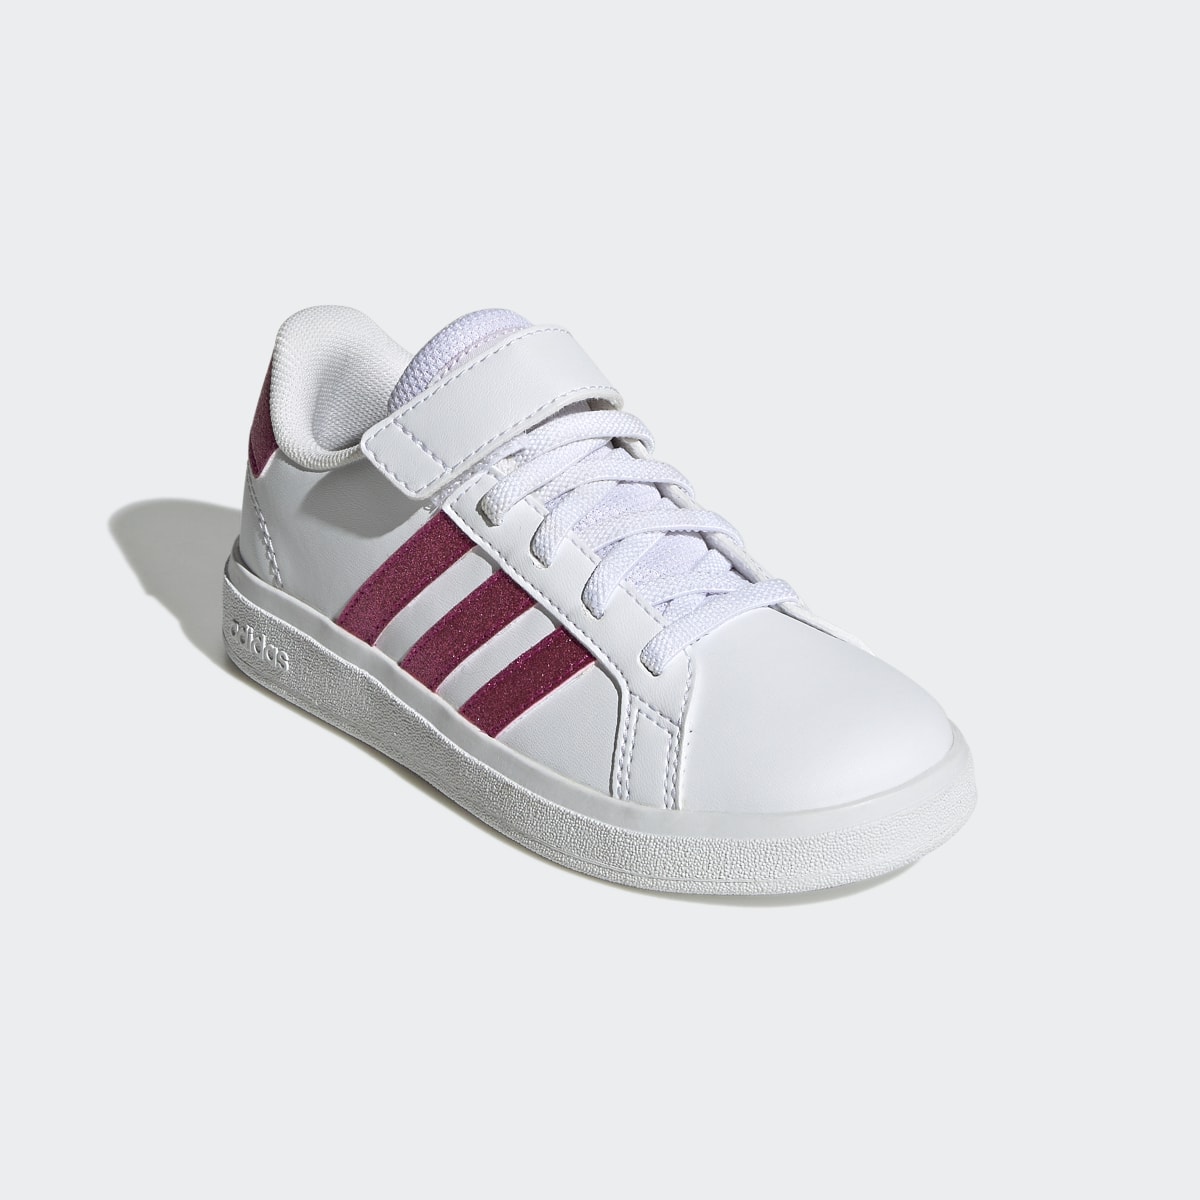 Adidas Grand Court Elastic Lace and Top Strap Shoes. 5